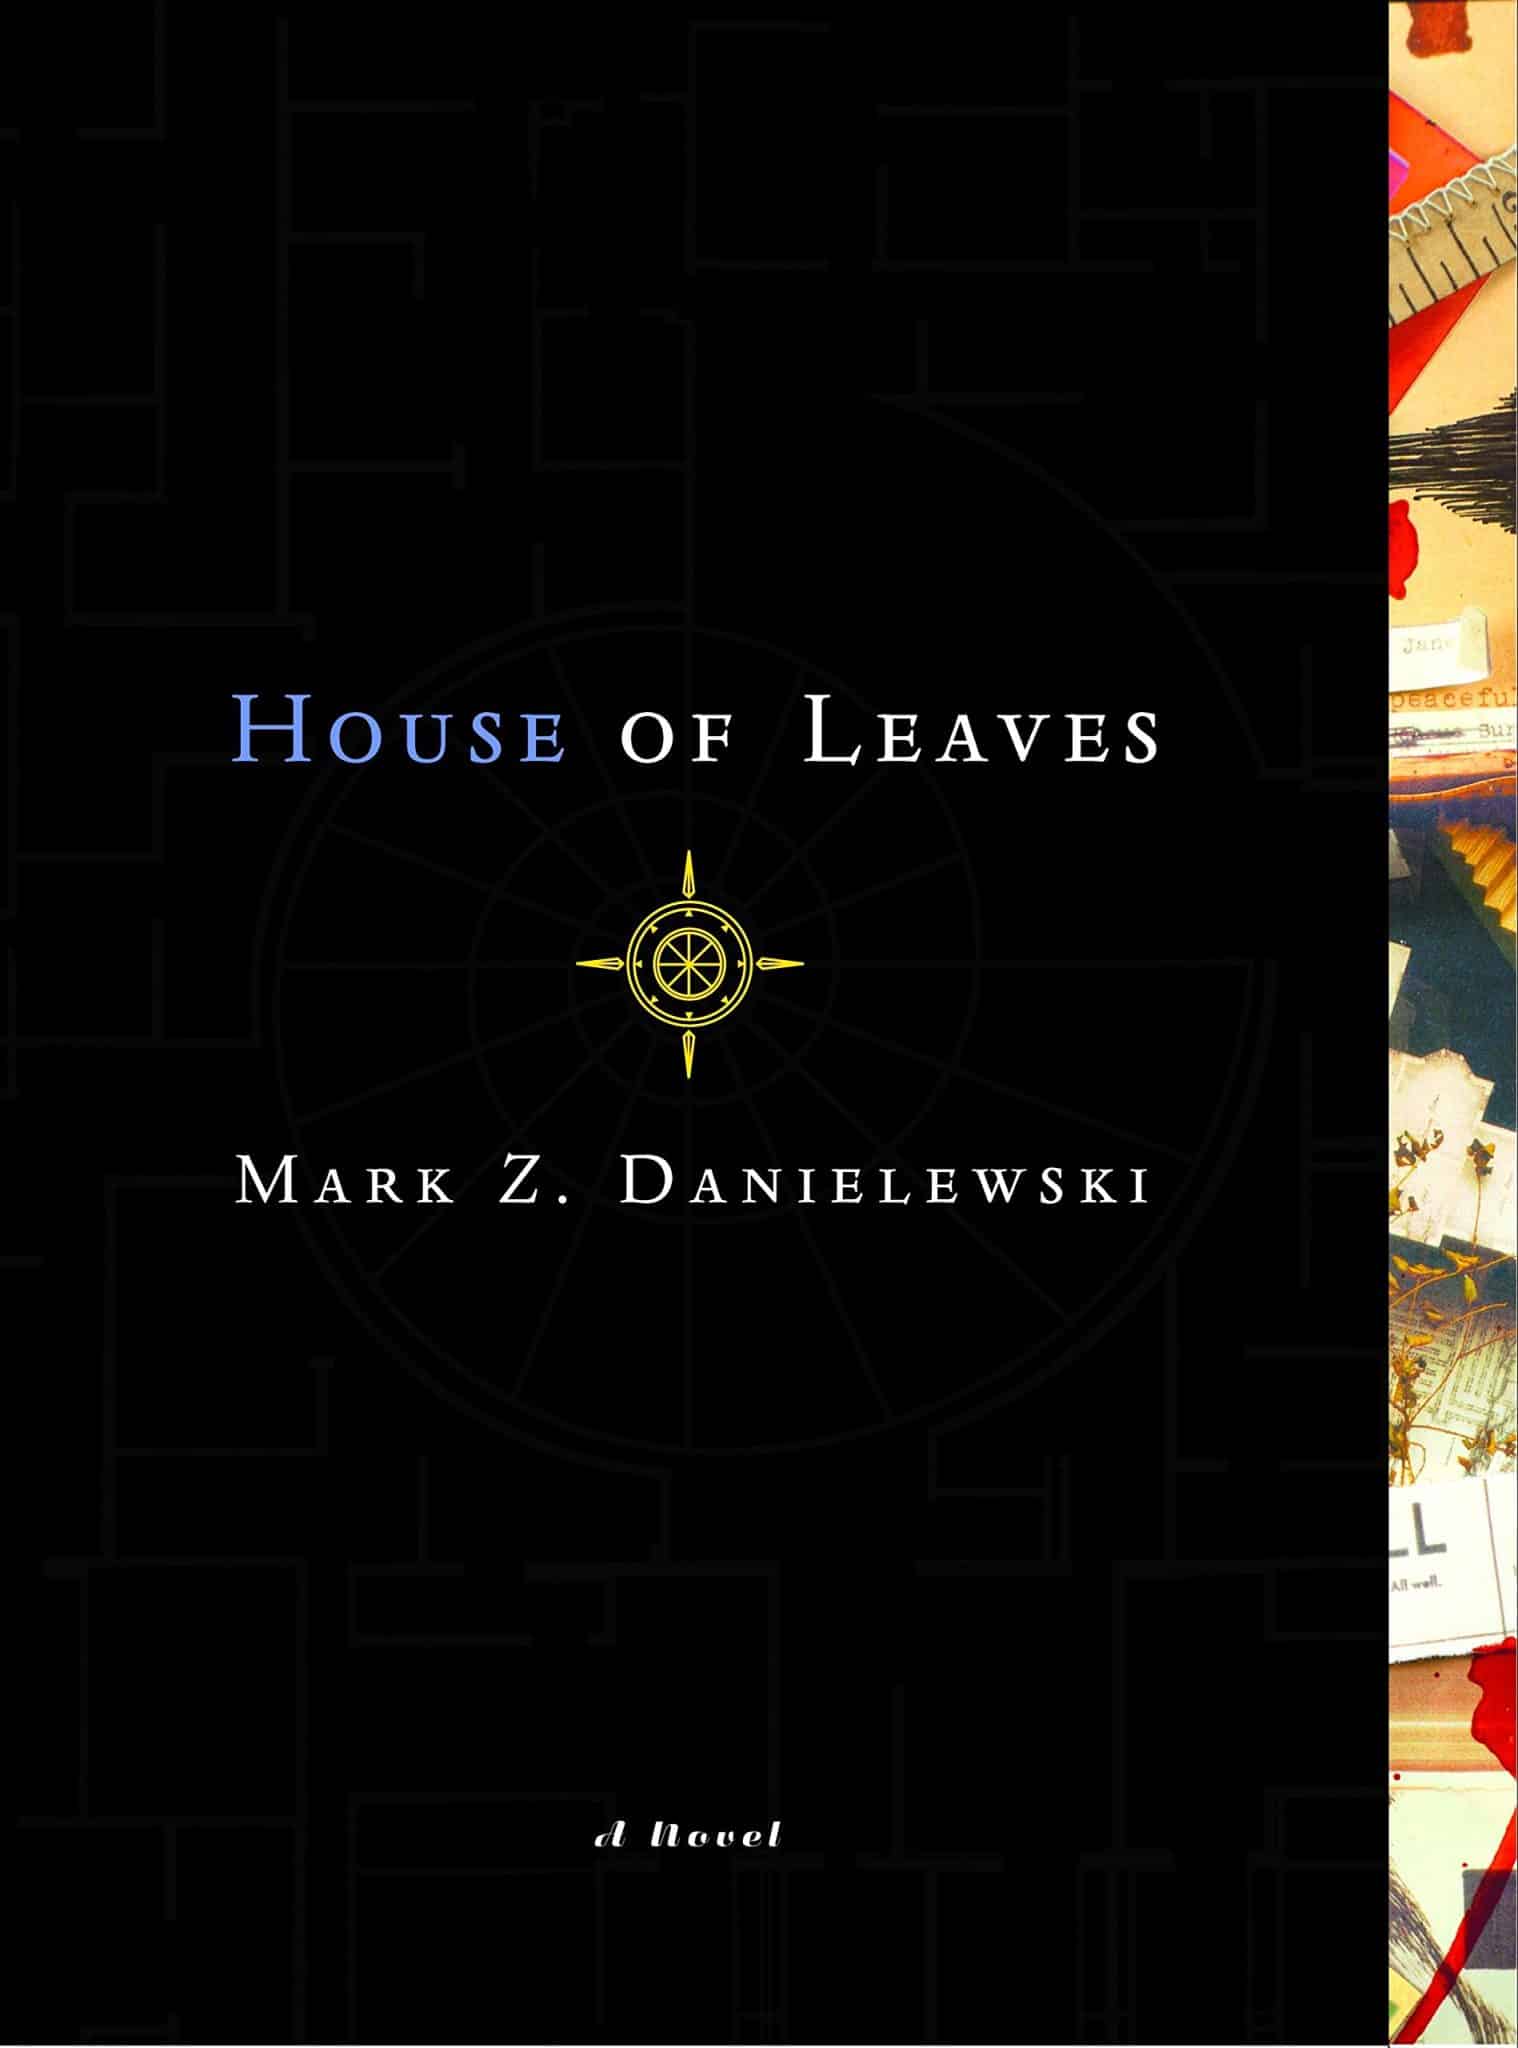 House of Leaves by Mark Z. Danielewski book cover, has a compass in the center of a black background.